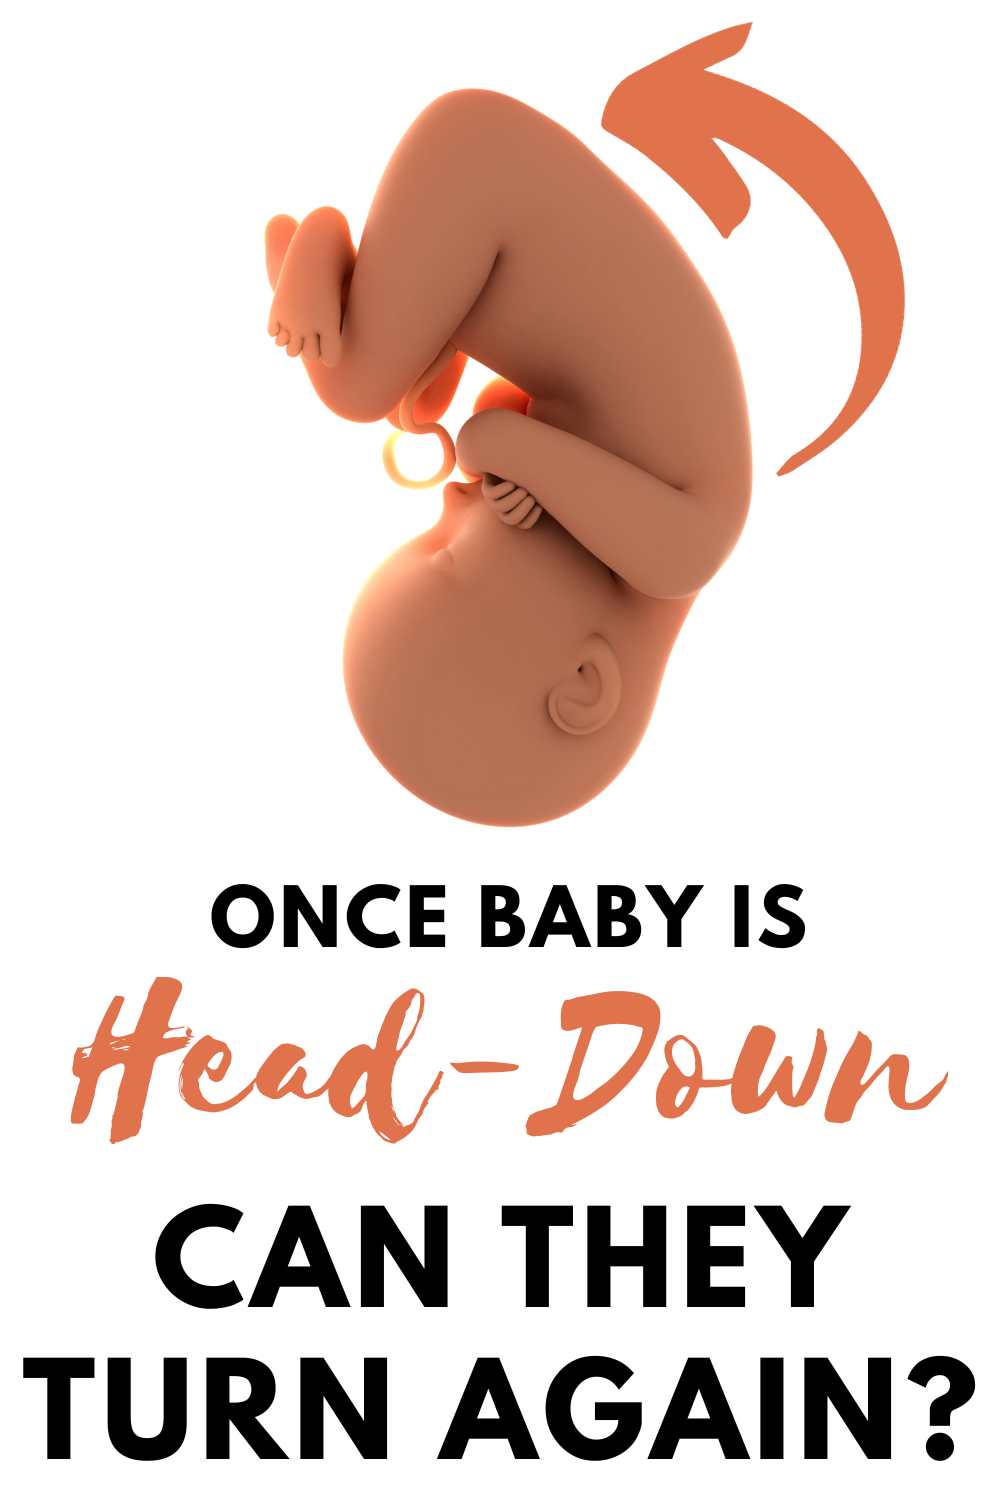 Having your baby in the head down position during the end of your pregnancy is an important step in having a healthy delivery. However, once they are positioned this way, you may be wondering if they can still turn again. The answer is yes! While the likelihood of your baby turning again decreases as you near your estimated due date, it's still possible for them to move around and change positions. Be sure to talk to your doctor about any changes you notice - such as an increase or decrease in movement - so that they can assess the situation and provide you with peace of mind.